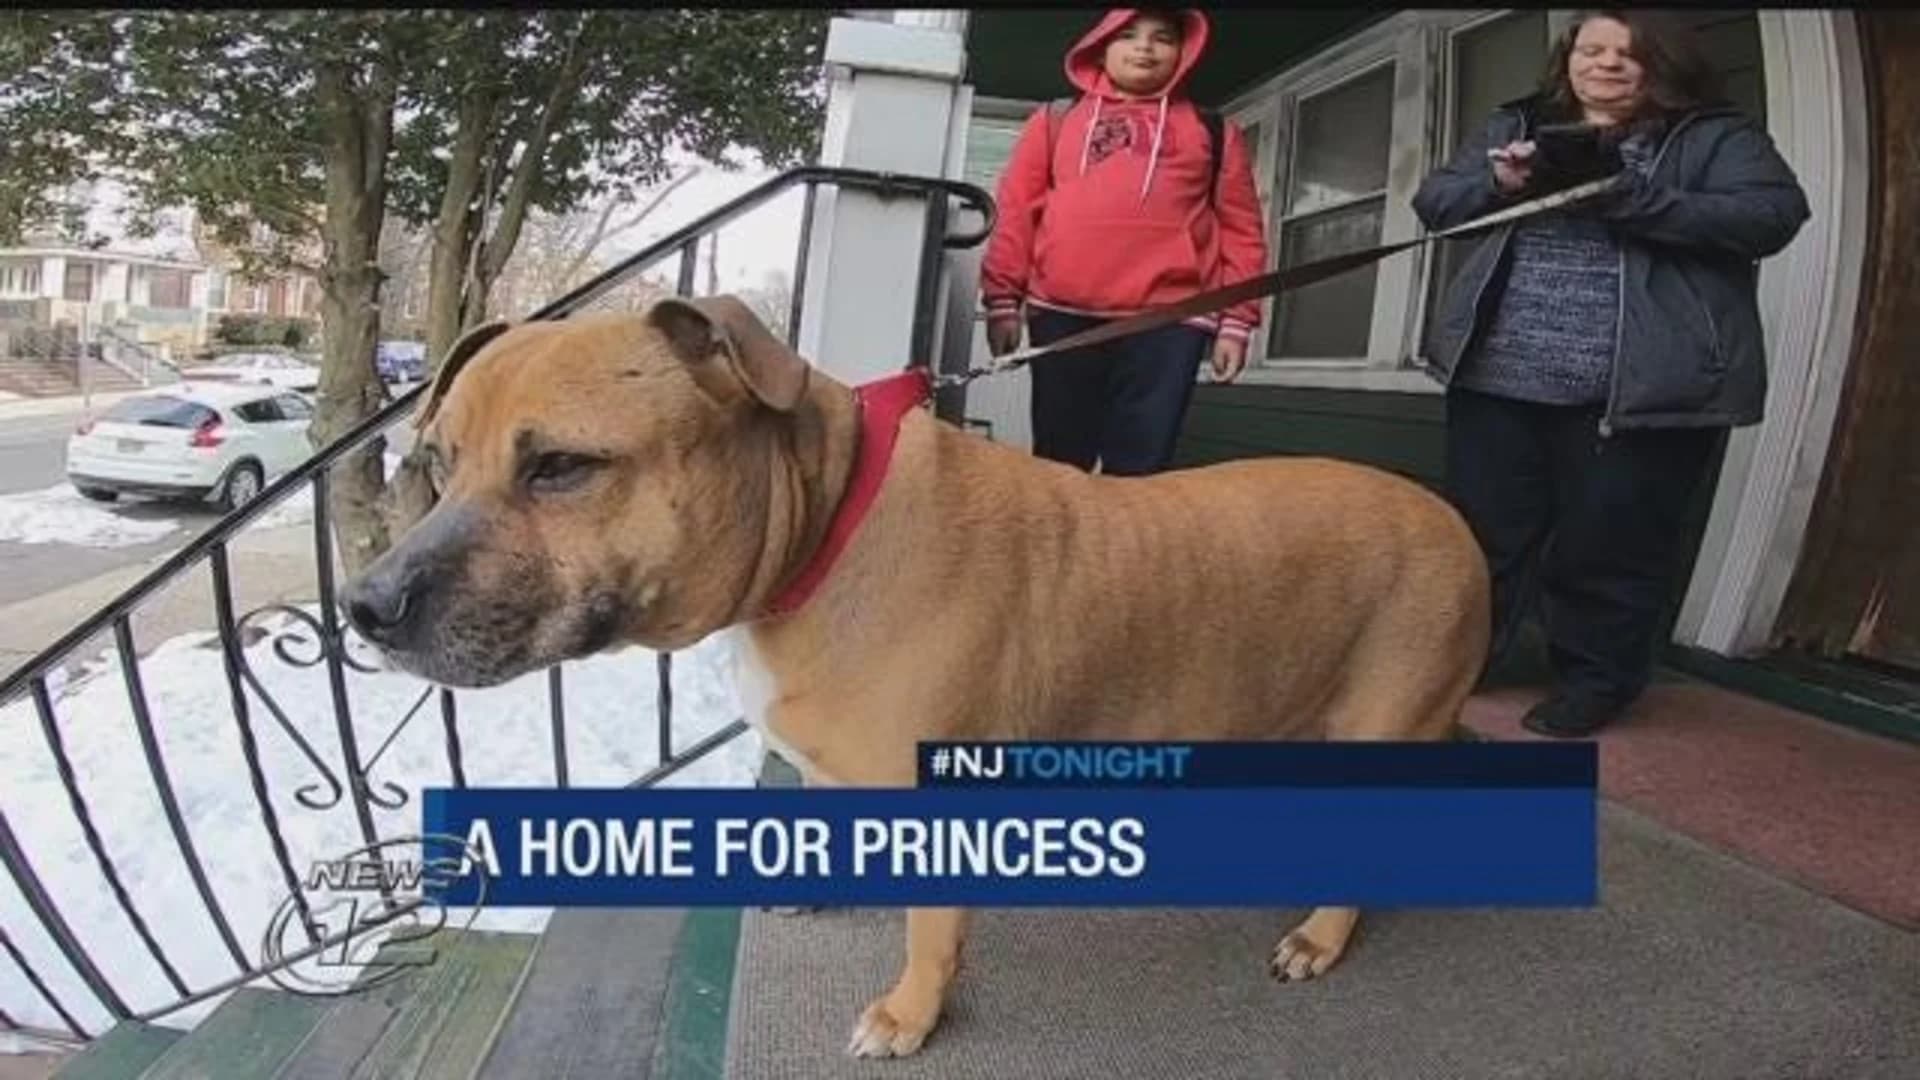 Last dog left to be adopted from shelter finds new home